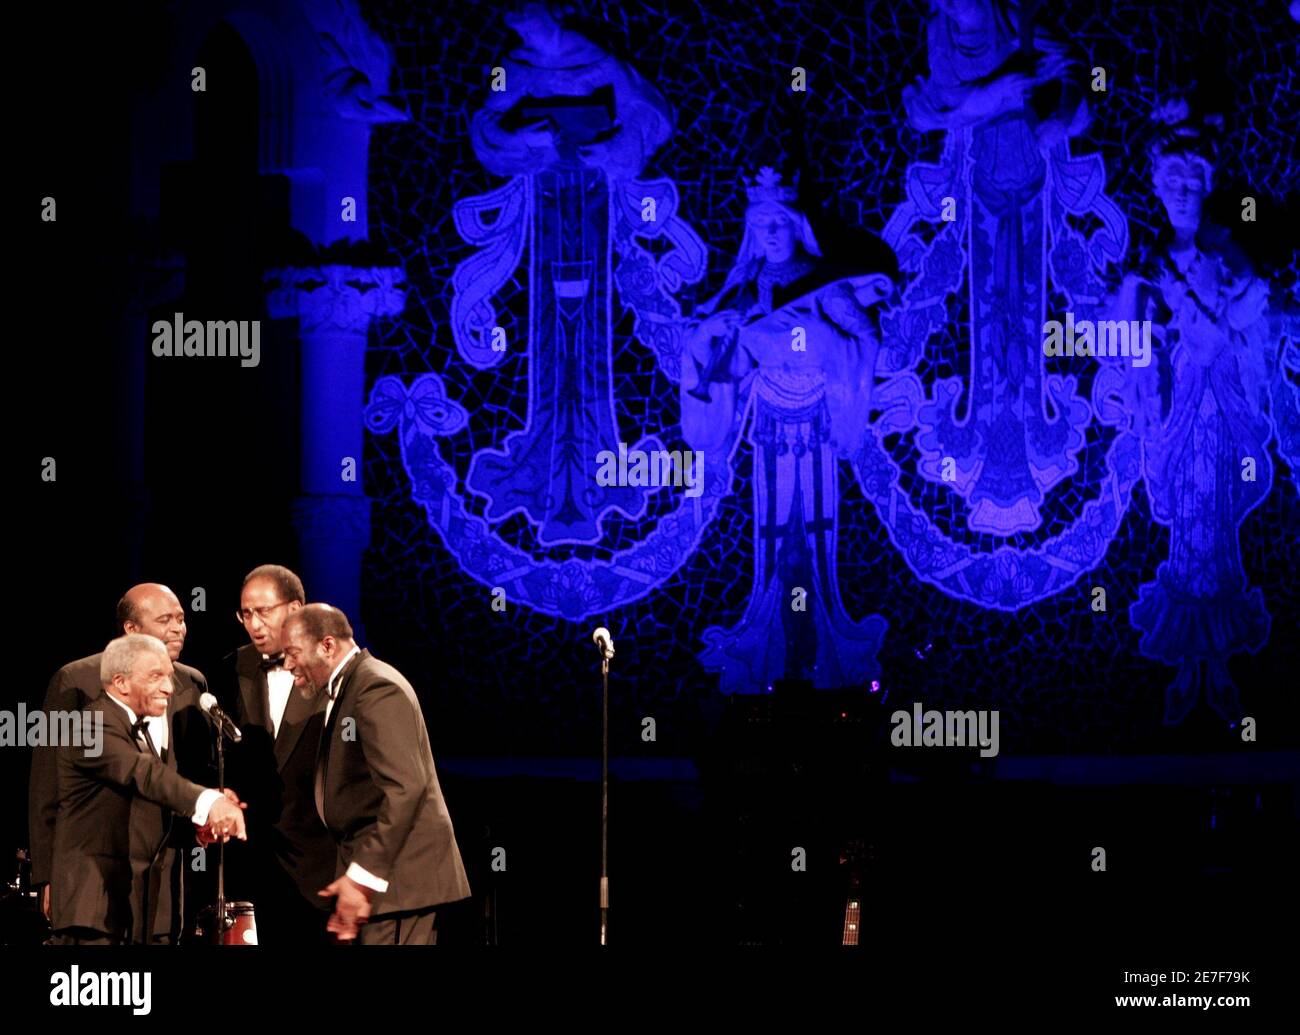 The Golden Gate Quartet from the U.S. performs at "Palau de la Musica  Catalana" during the Mil.leni festival in Barcelona, January 30, 2008.  REUTERS/Gustau Nacarino (SPAIN Stock Photo - Alamy